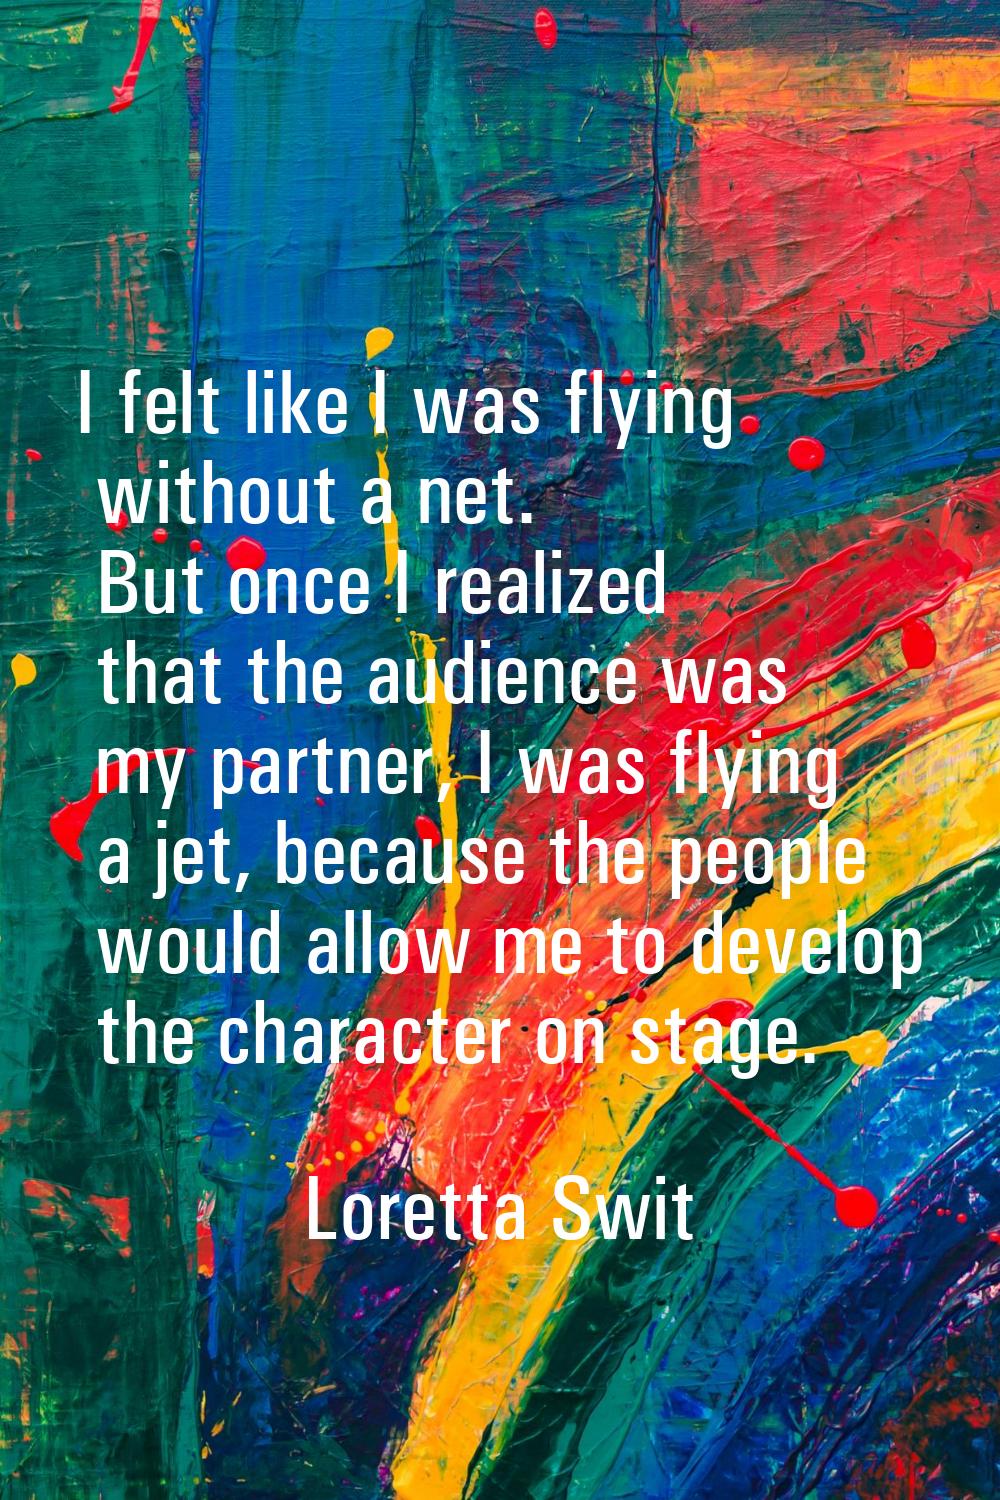 I felt like I was flying without a net. But once I realized that the audience was my partner, I was